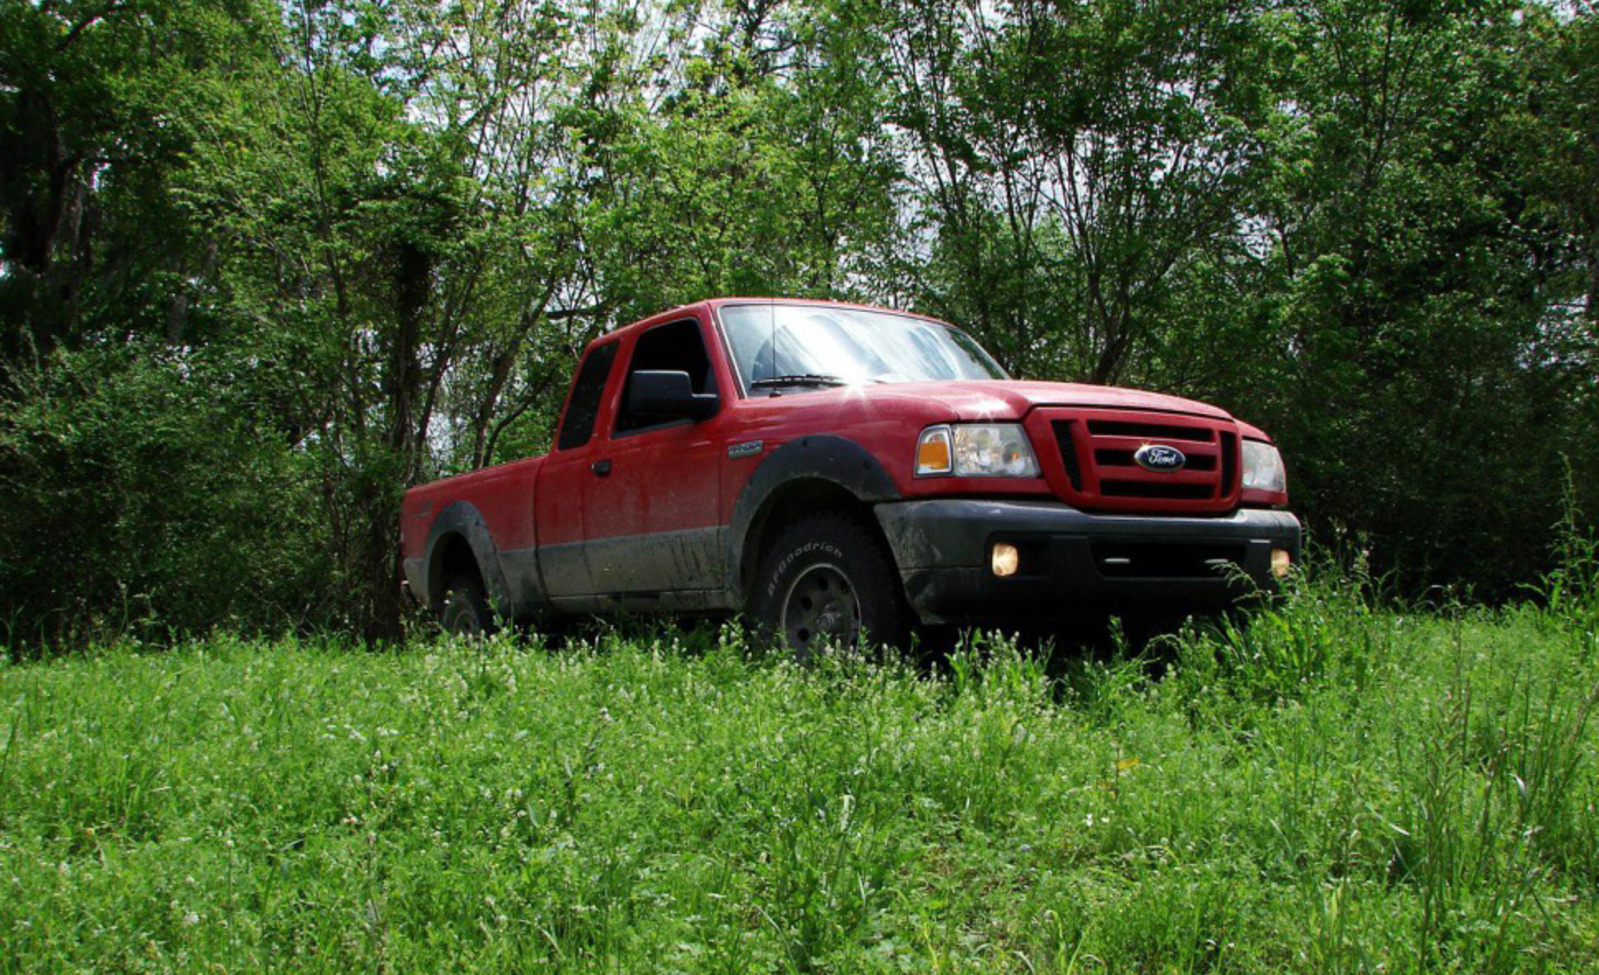 Ford Ranger II Super Cab 2.3 (143 Hp) Automatic 2006, 2007, 2008, 2009, 2010 